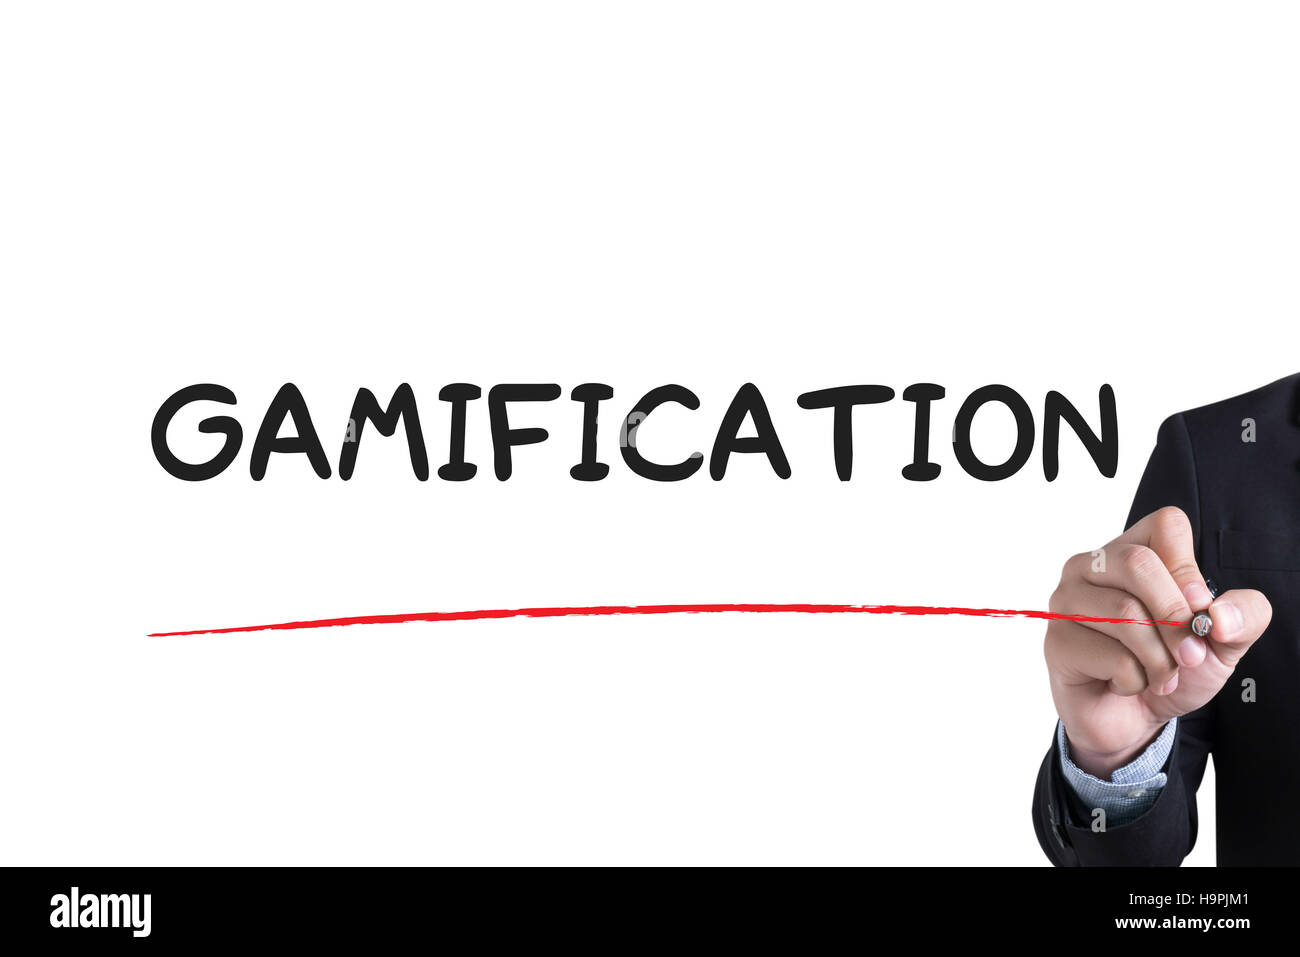 GAMIFICATION Banque D'Images